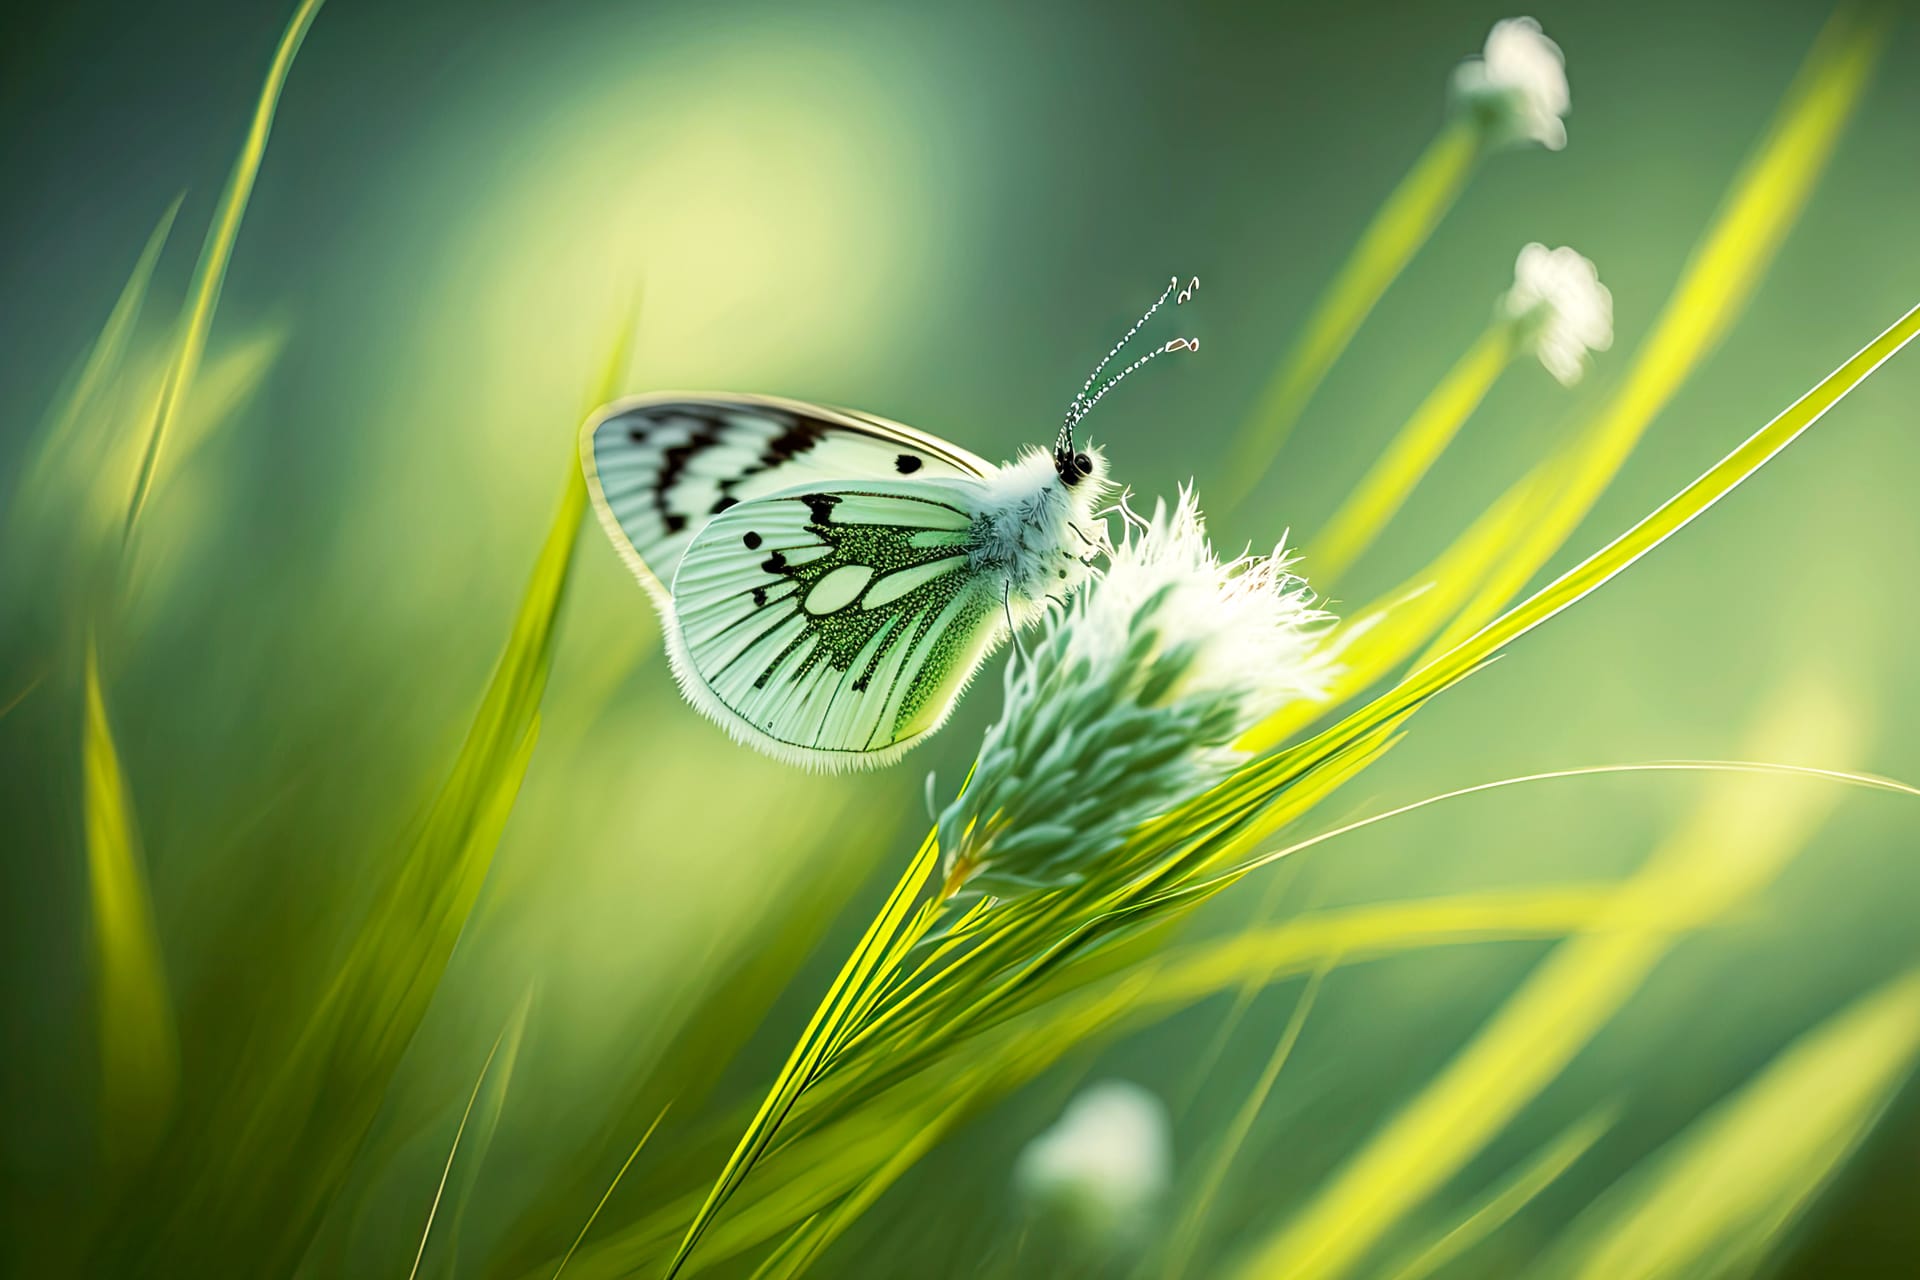 Grass flower with beautiful butterfly blurred green background butterfly image